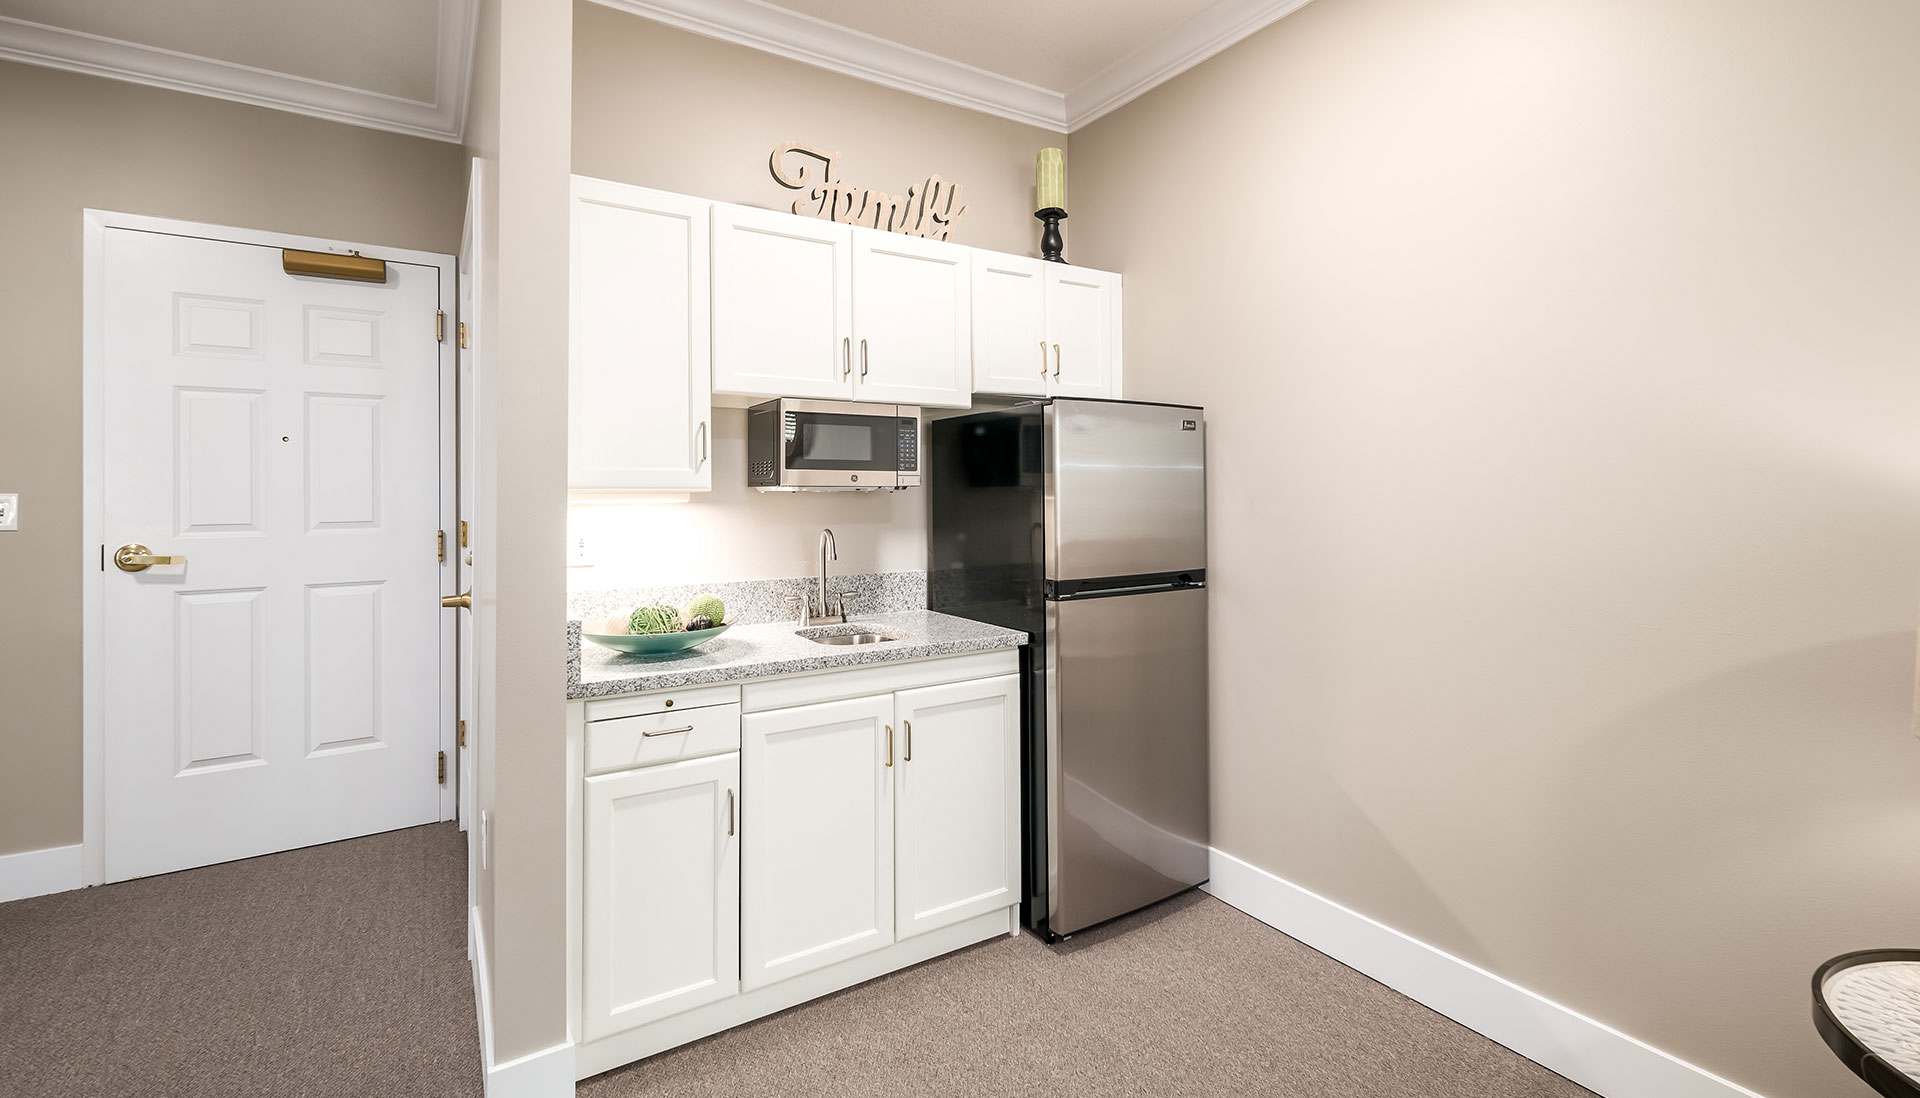 Kitchenette with a fridge and sink